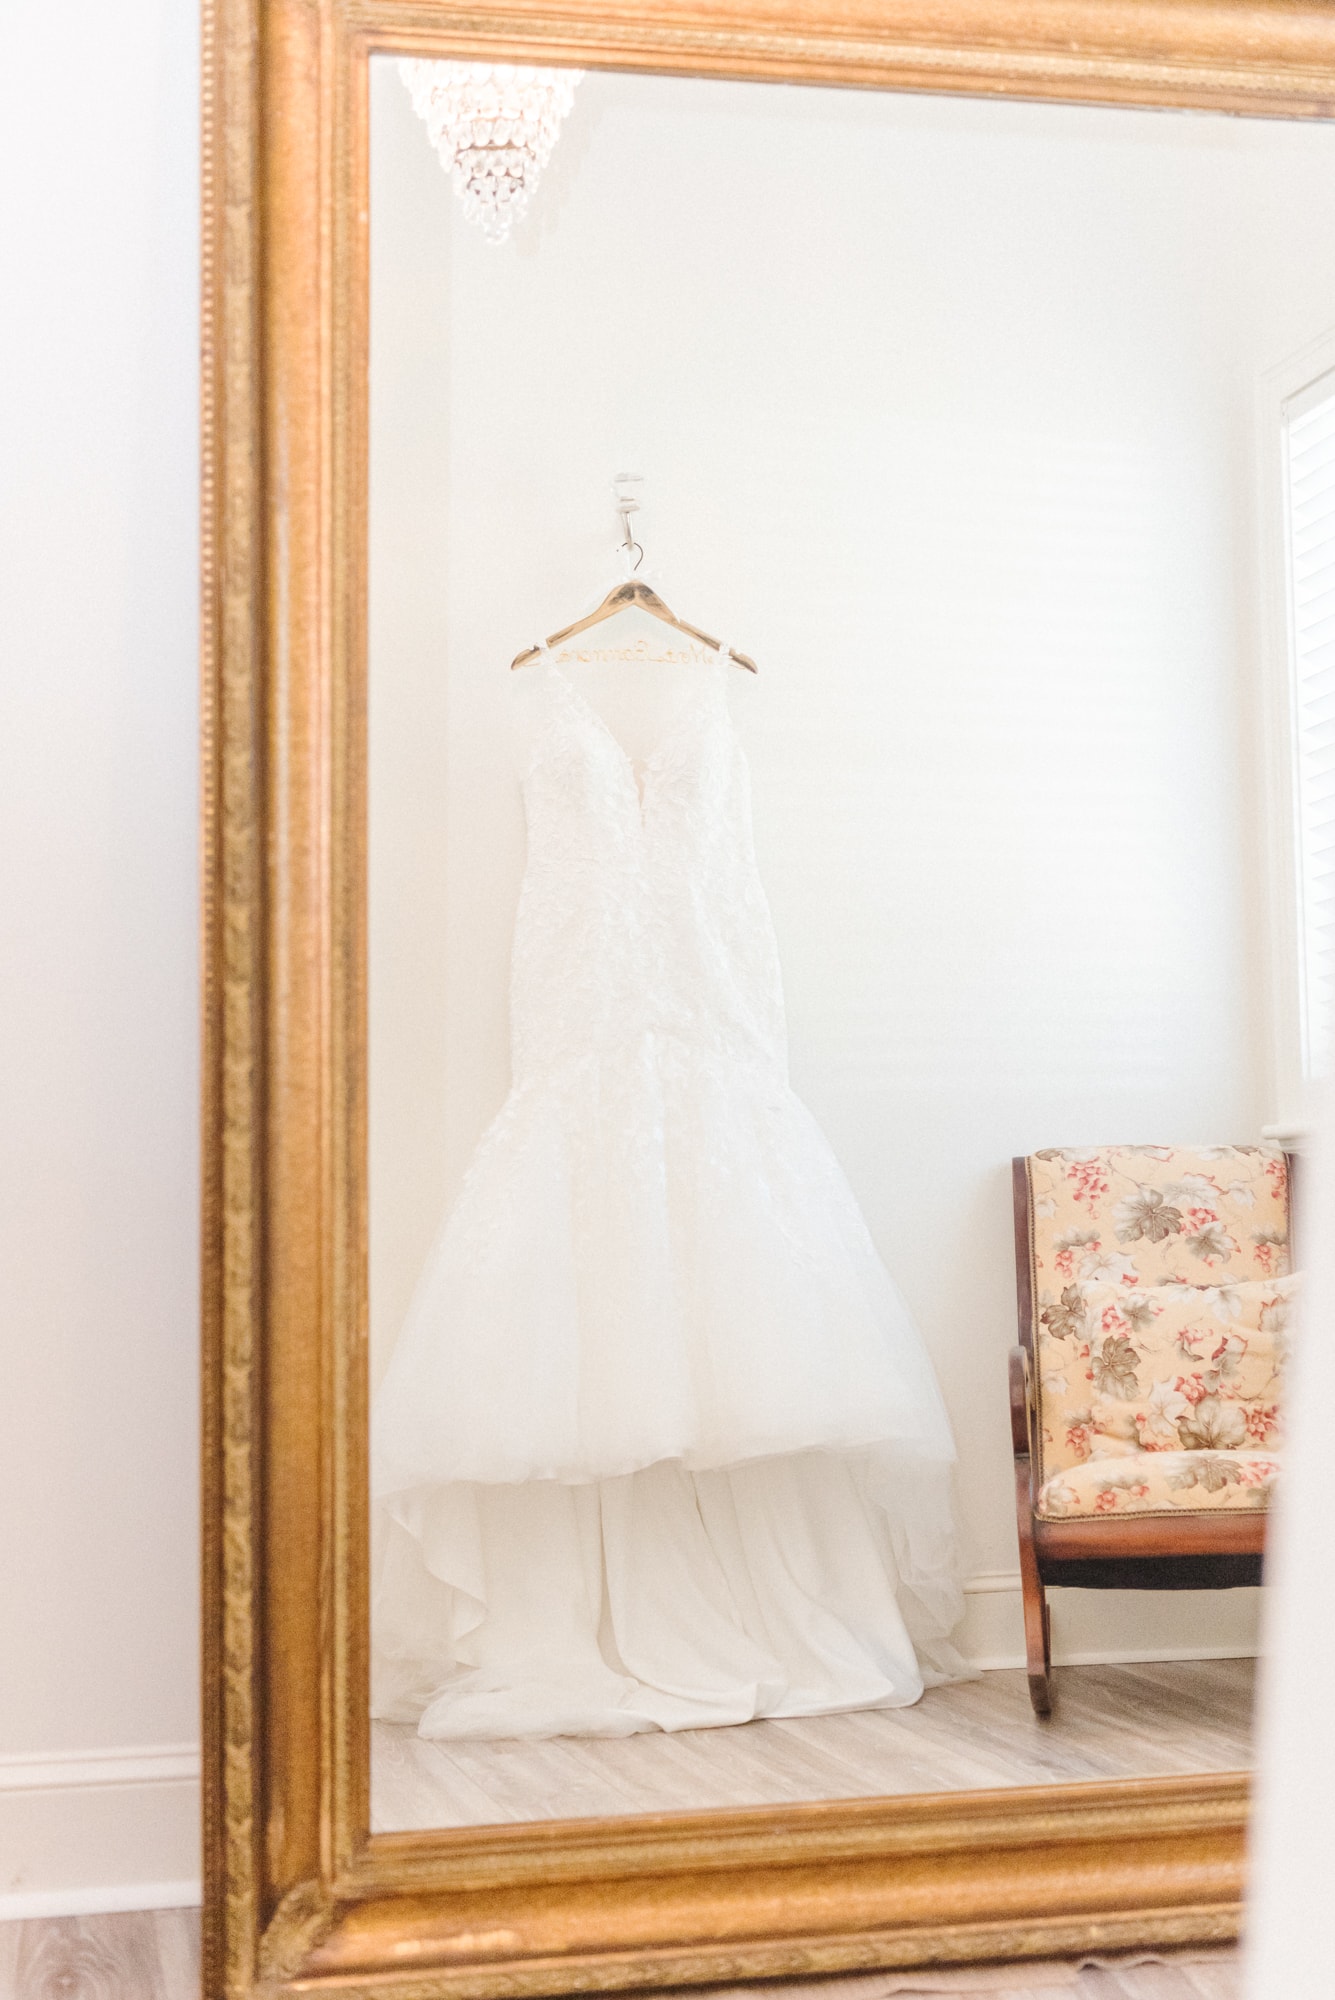 The bride's dress hangs off the wall, reflected in the mirror of Low Meadows Estate.